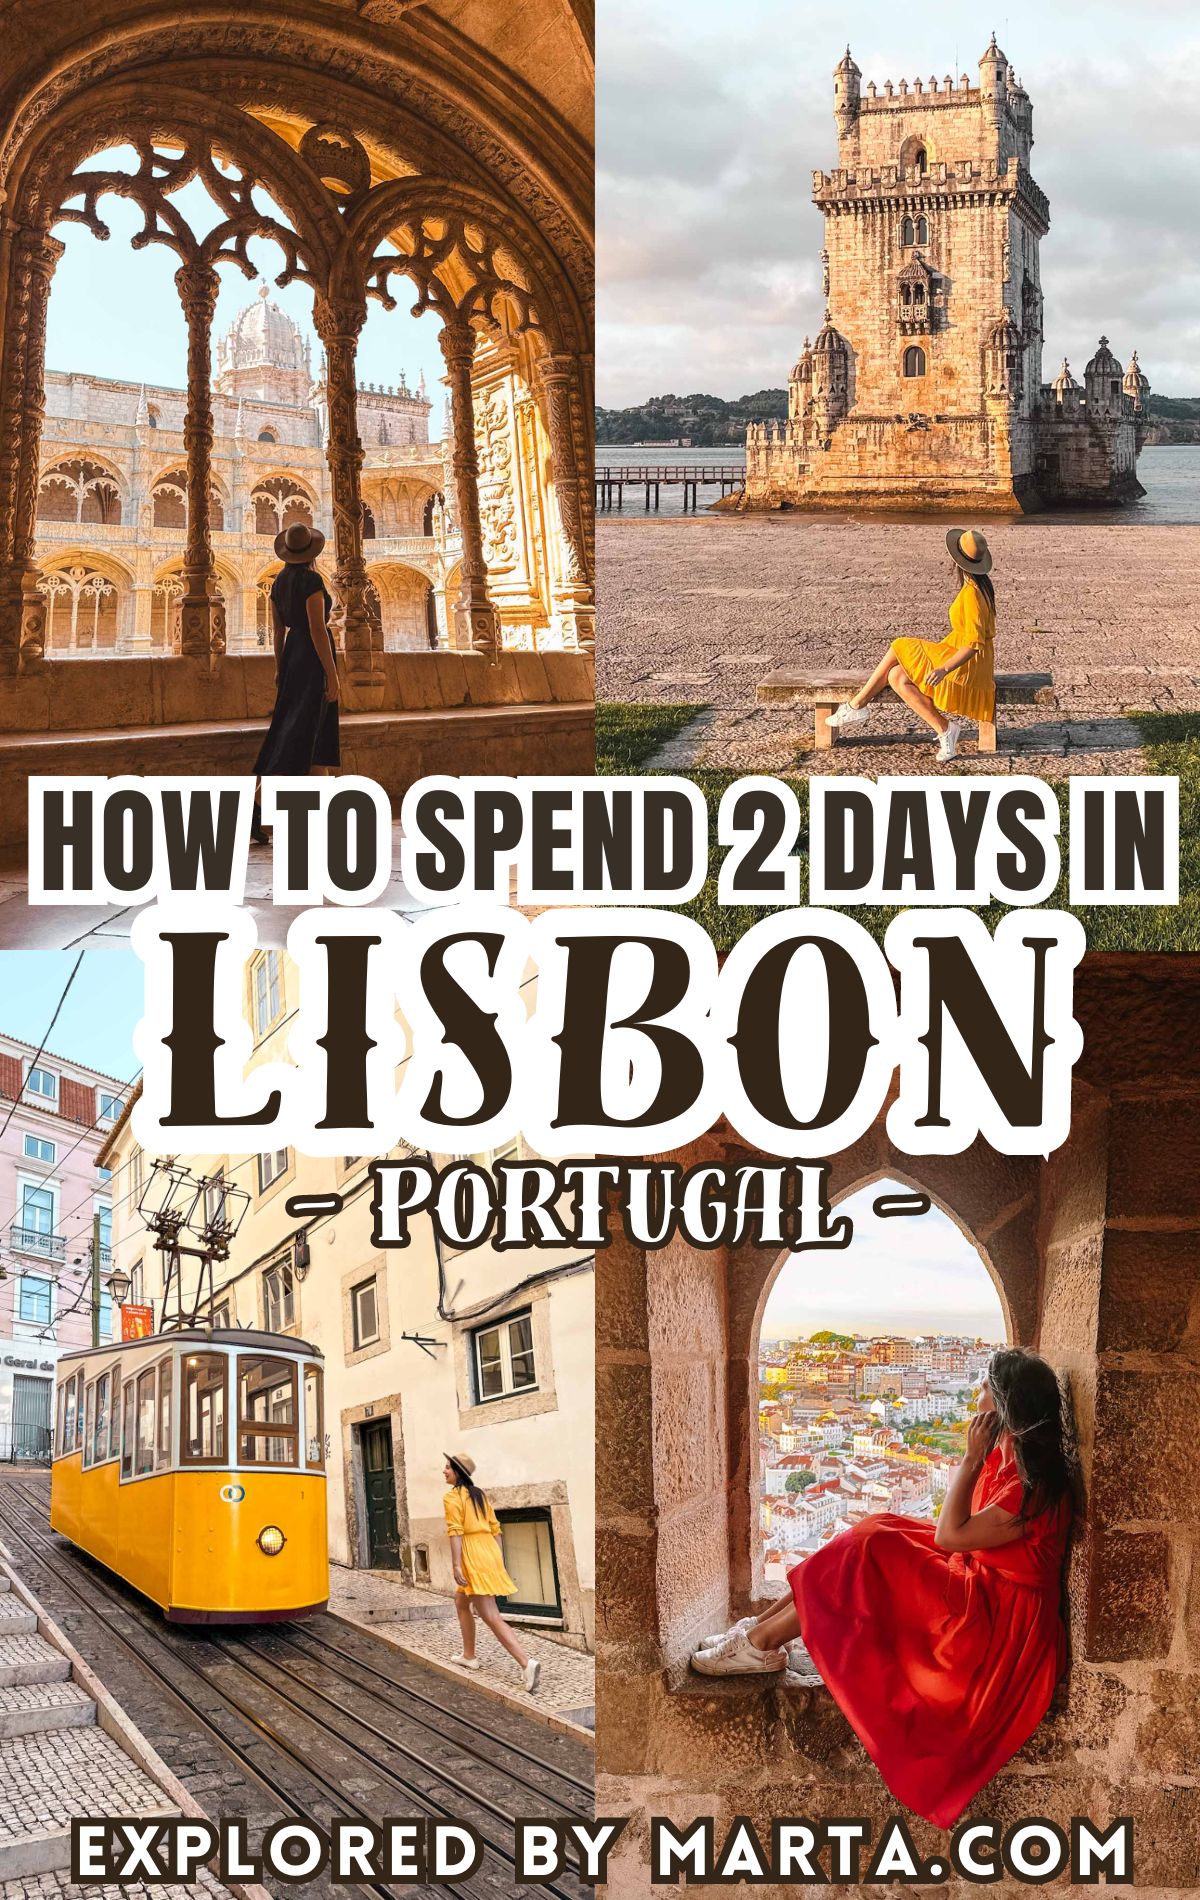 Things to do in 2 days in Lisbon, Portugal